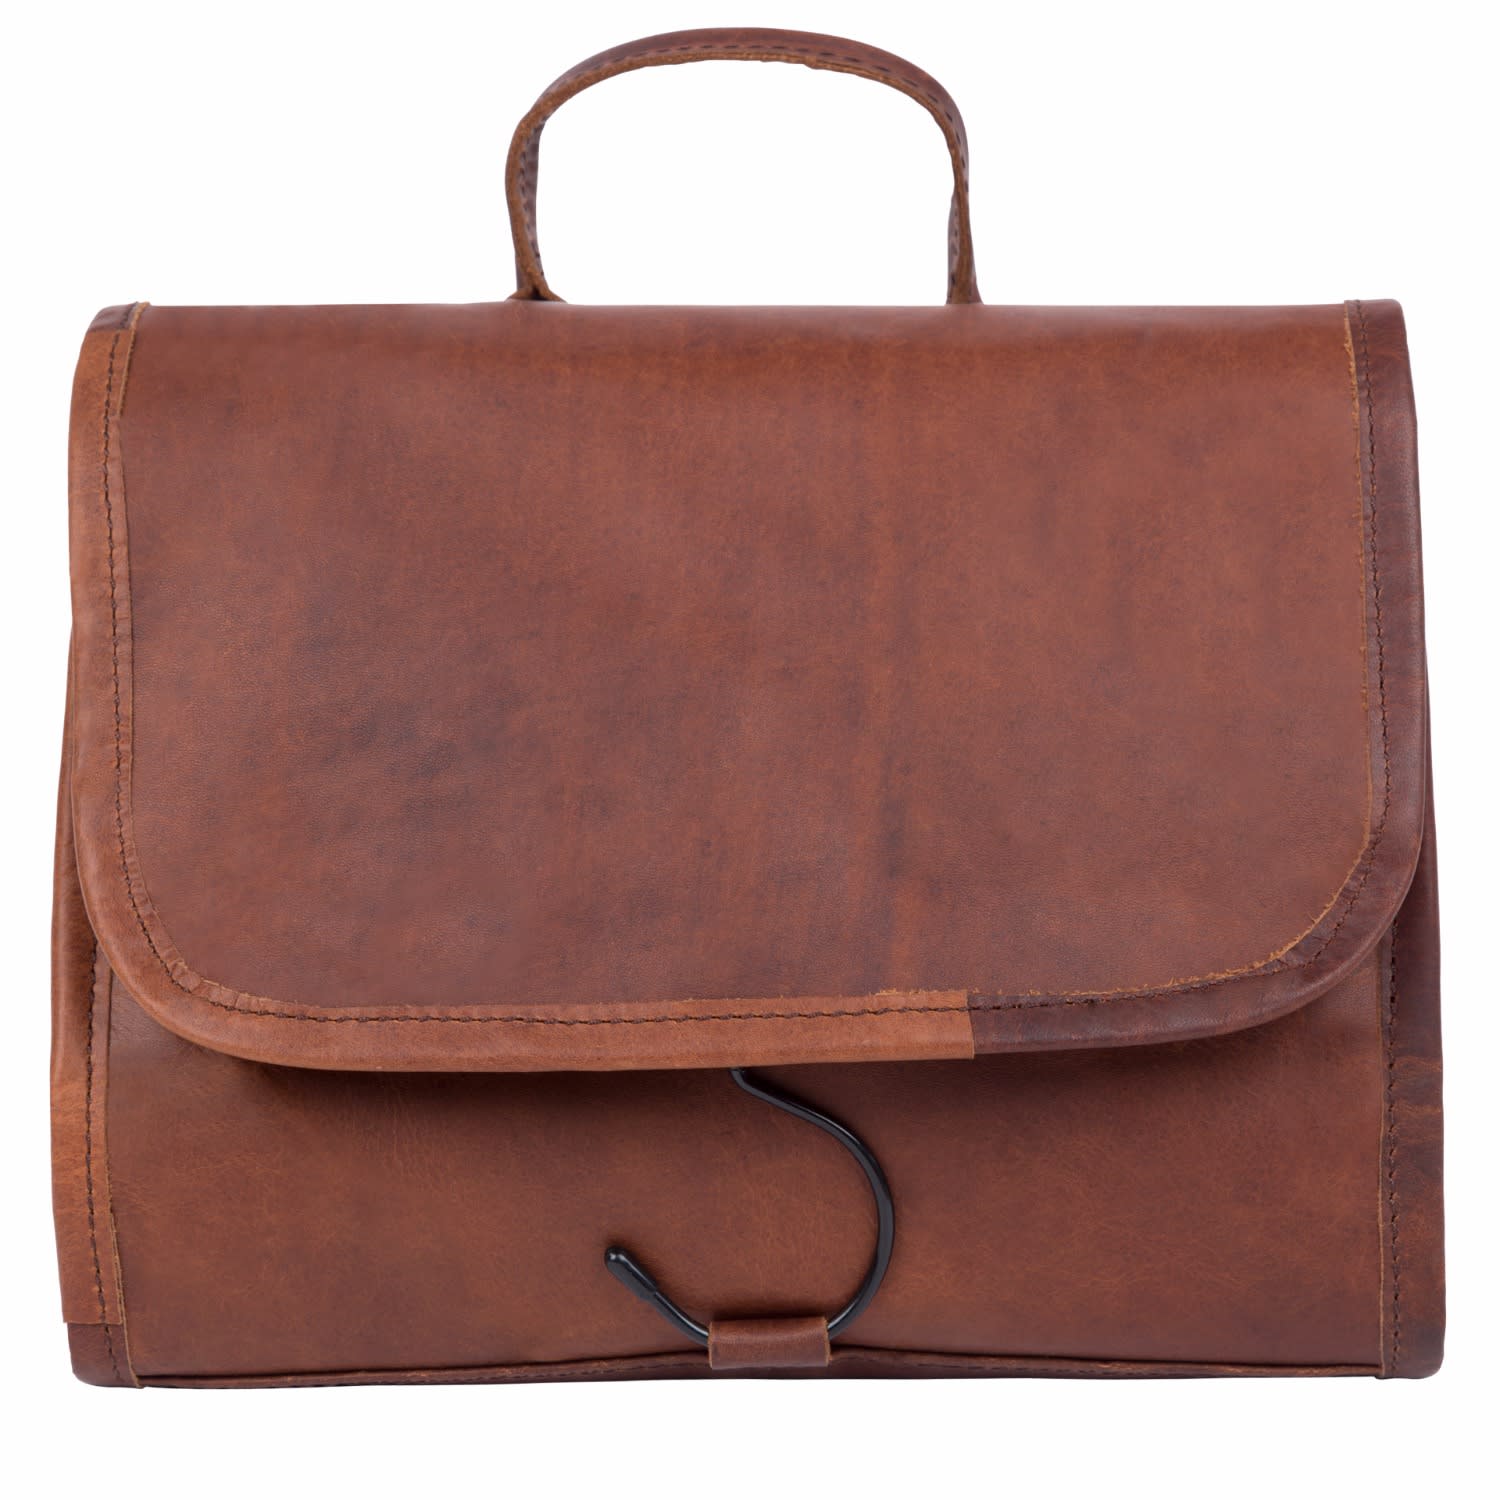 Leather Hanging Wash Toiletry Bag Dopp Kit in Vintage Brown with ...